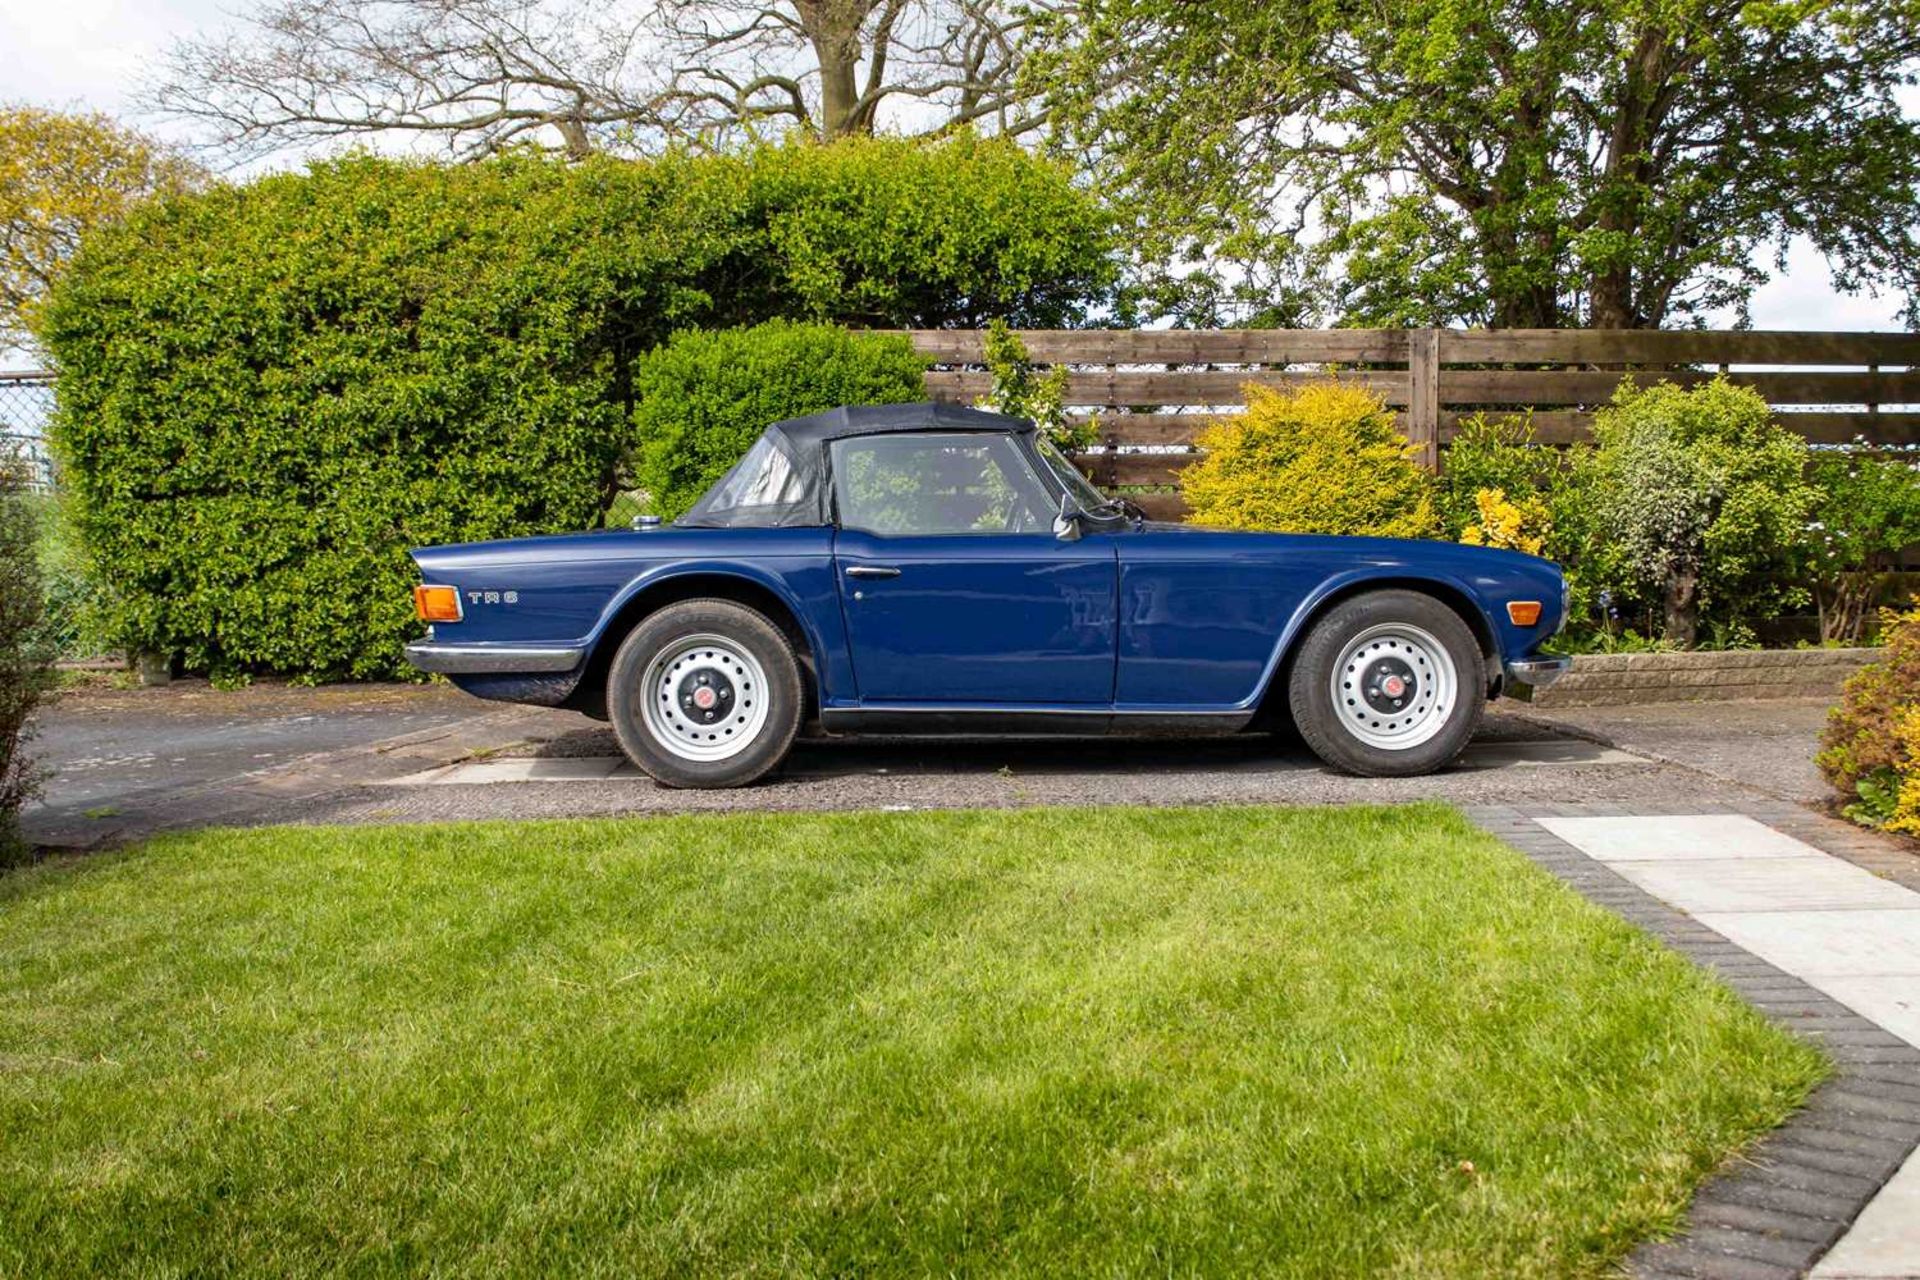 1972 Triumph TR6 Home market example, specified with manual overdrive transmission - Image 8 of 95